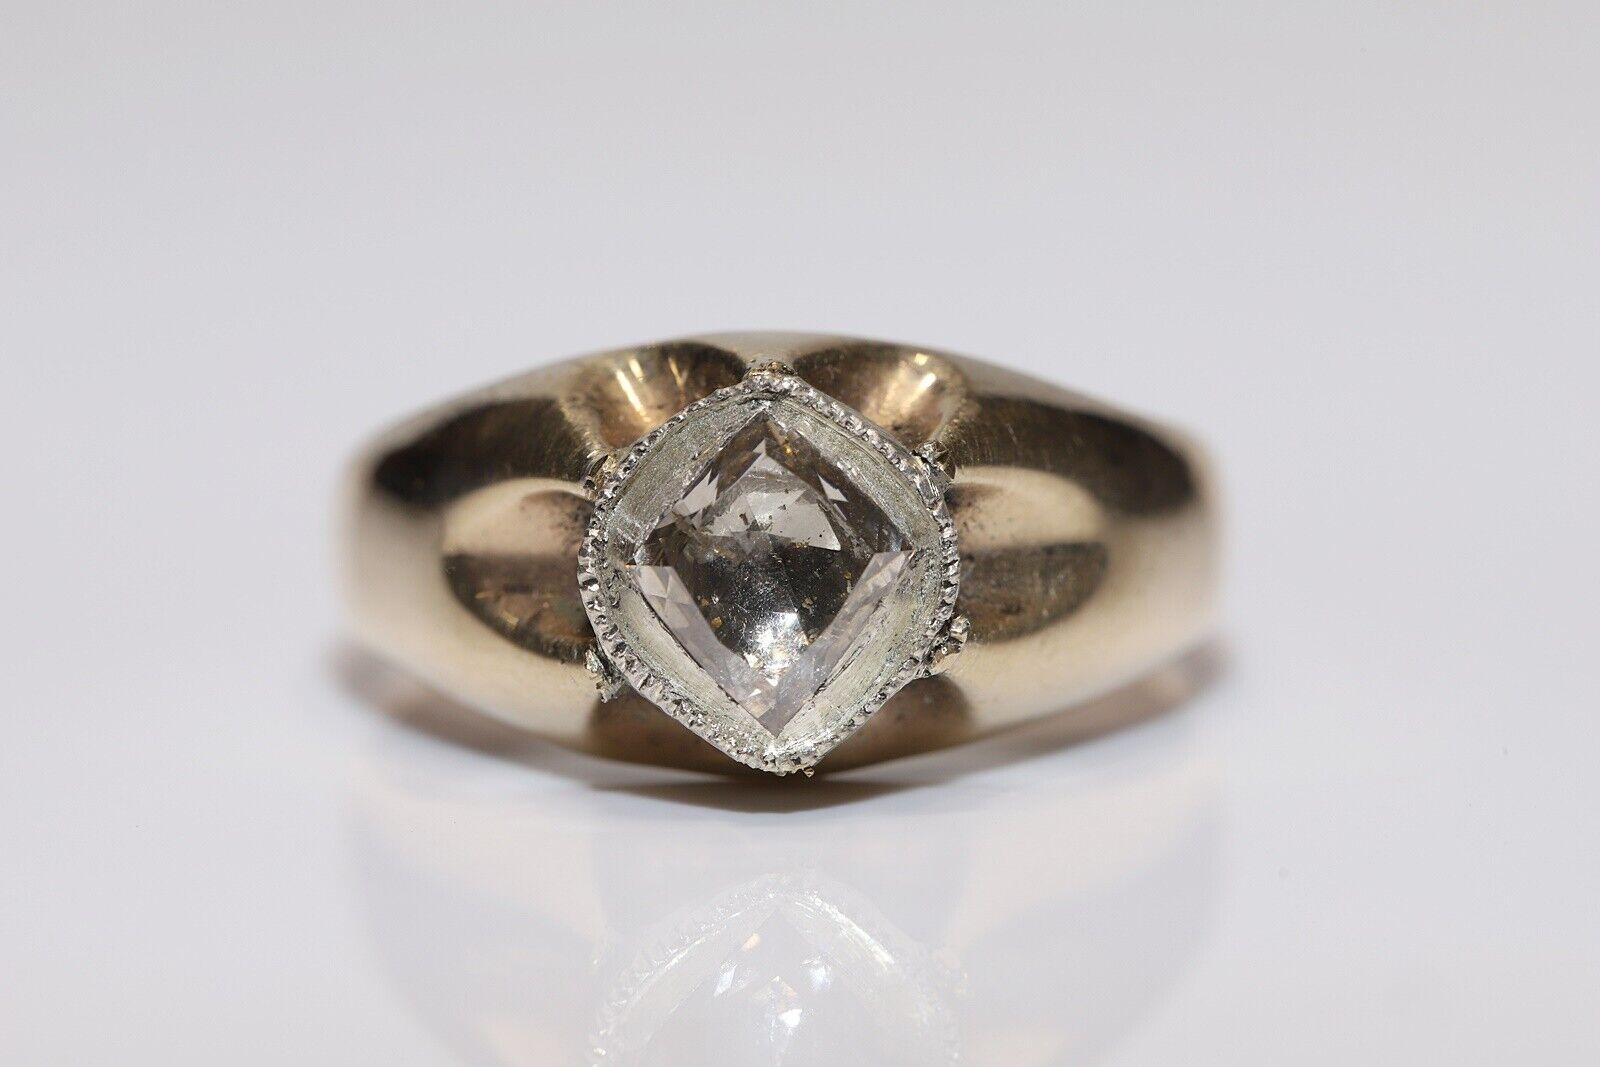 In very good condition.
Total weight is 4.7 grams.
Totally is diamond 1.15 carat.
The diamond is has Brown color and s2 clarity.
Ring size is US 8.9 (We offer free resizing)
We can make any size.
Box is not included.
Please contact for any questions.